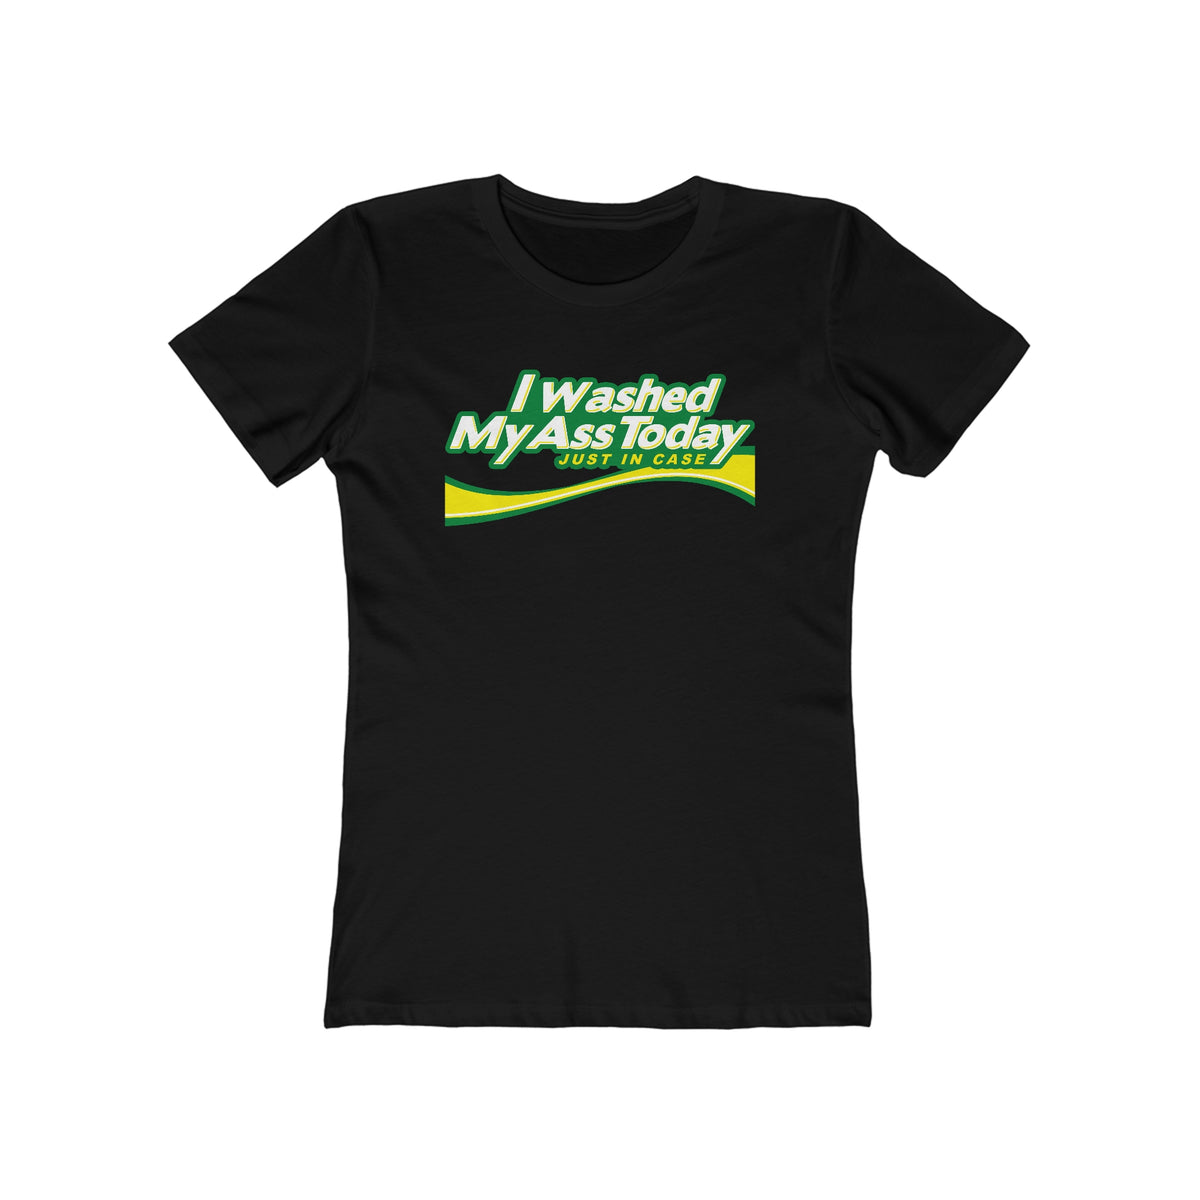 I Washed My Ass Today - Just In Case - Women’s T-Shirt